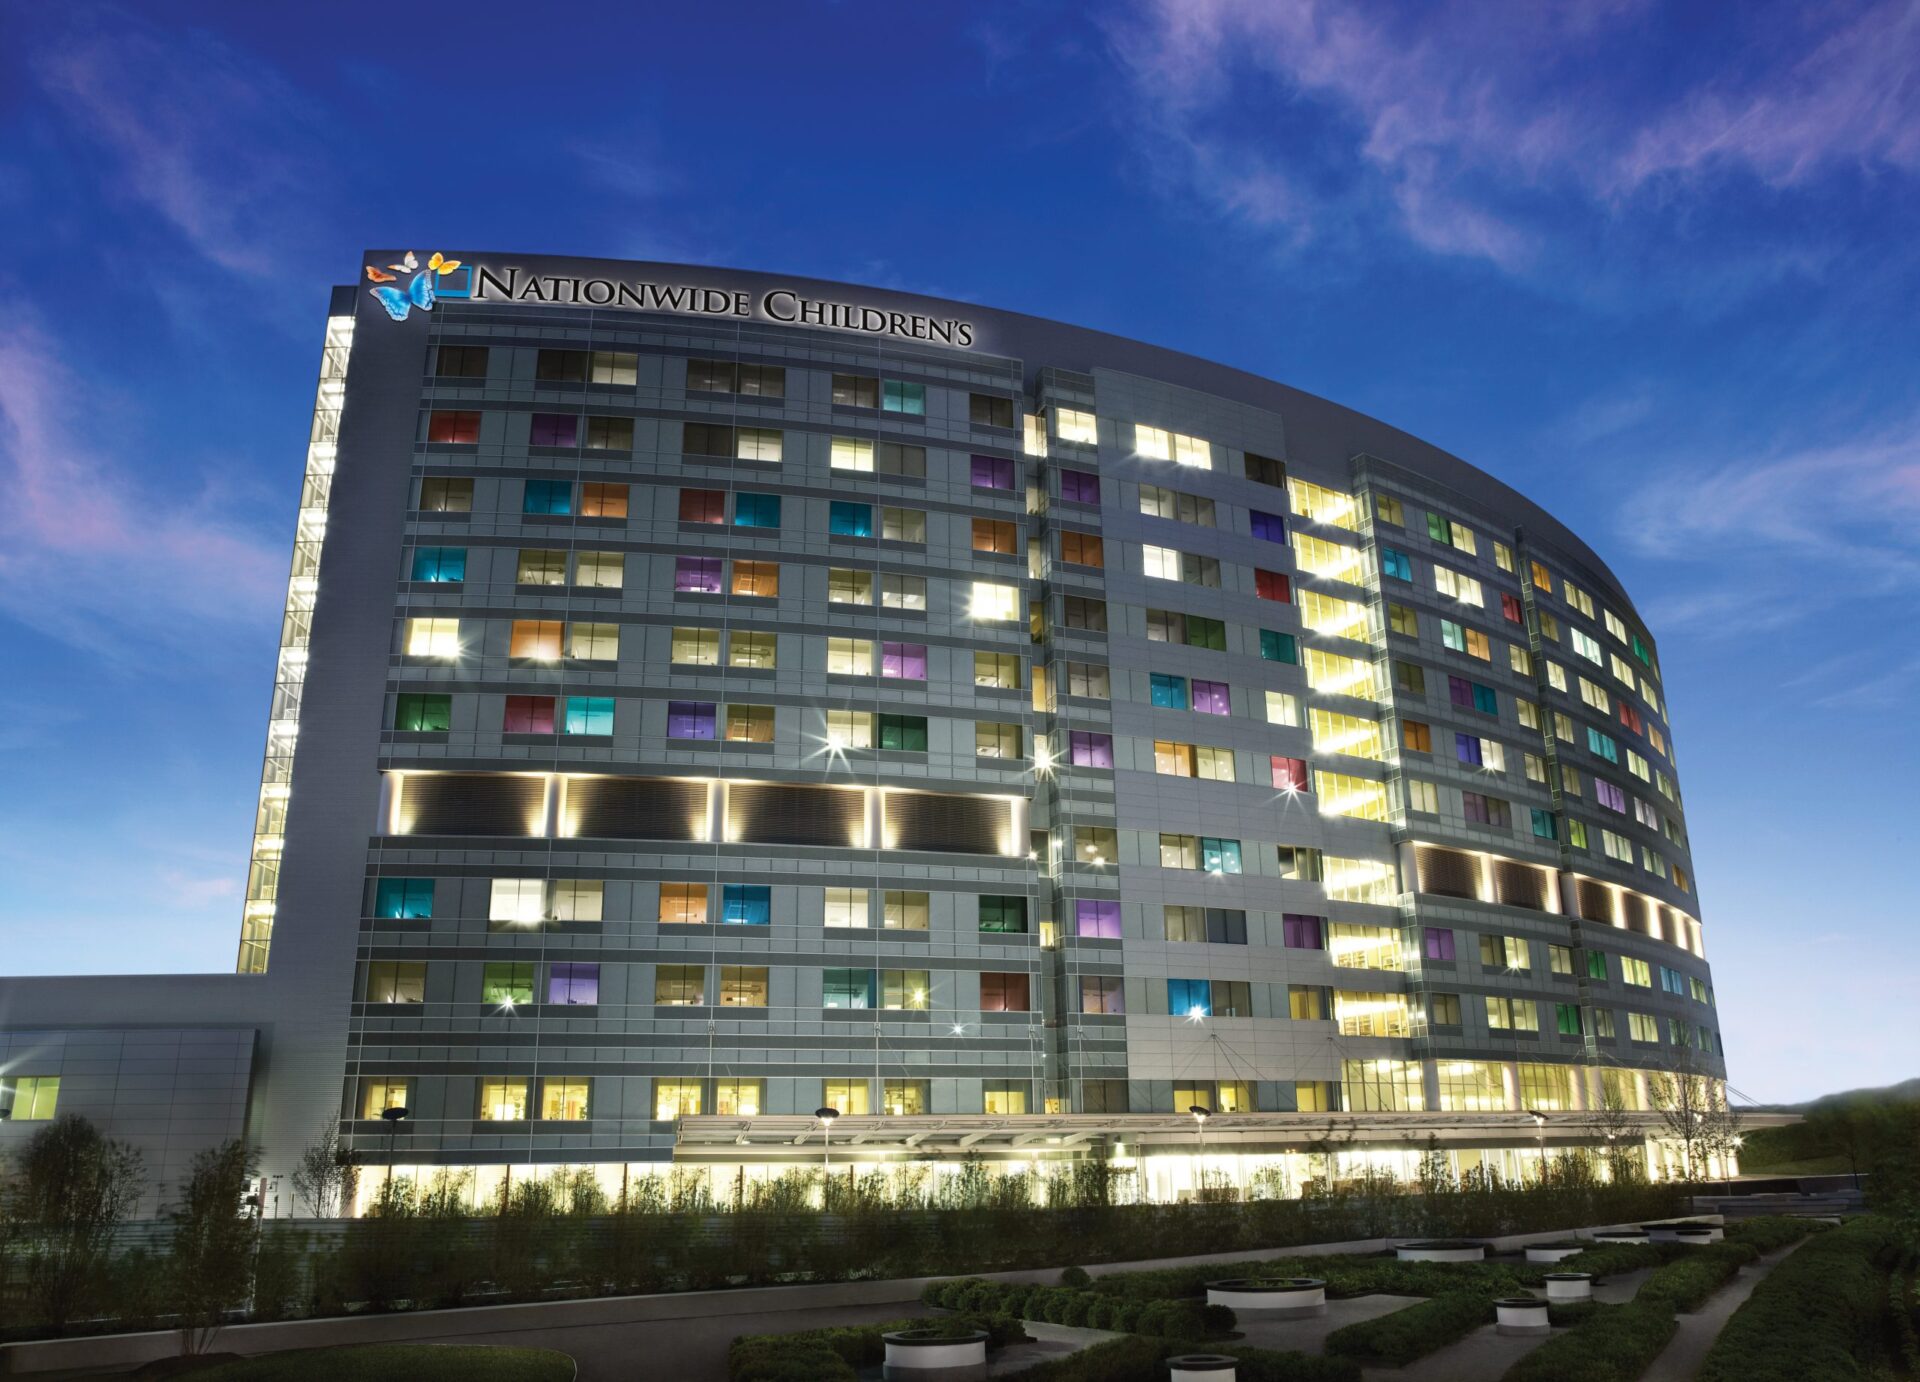 Nationwide Children’s Hospital in Columbus, Ohio is one of the early innovators in gene therapy science.